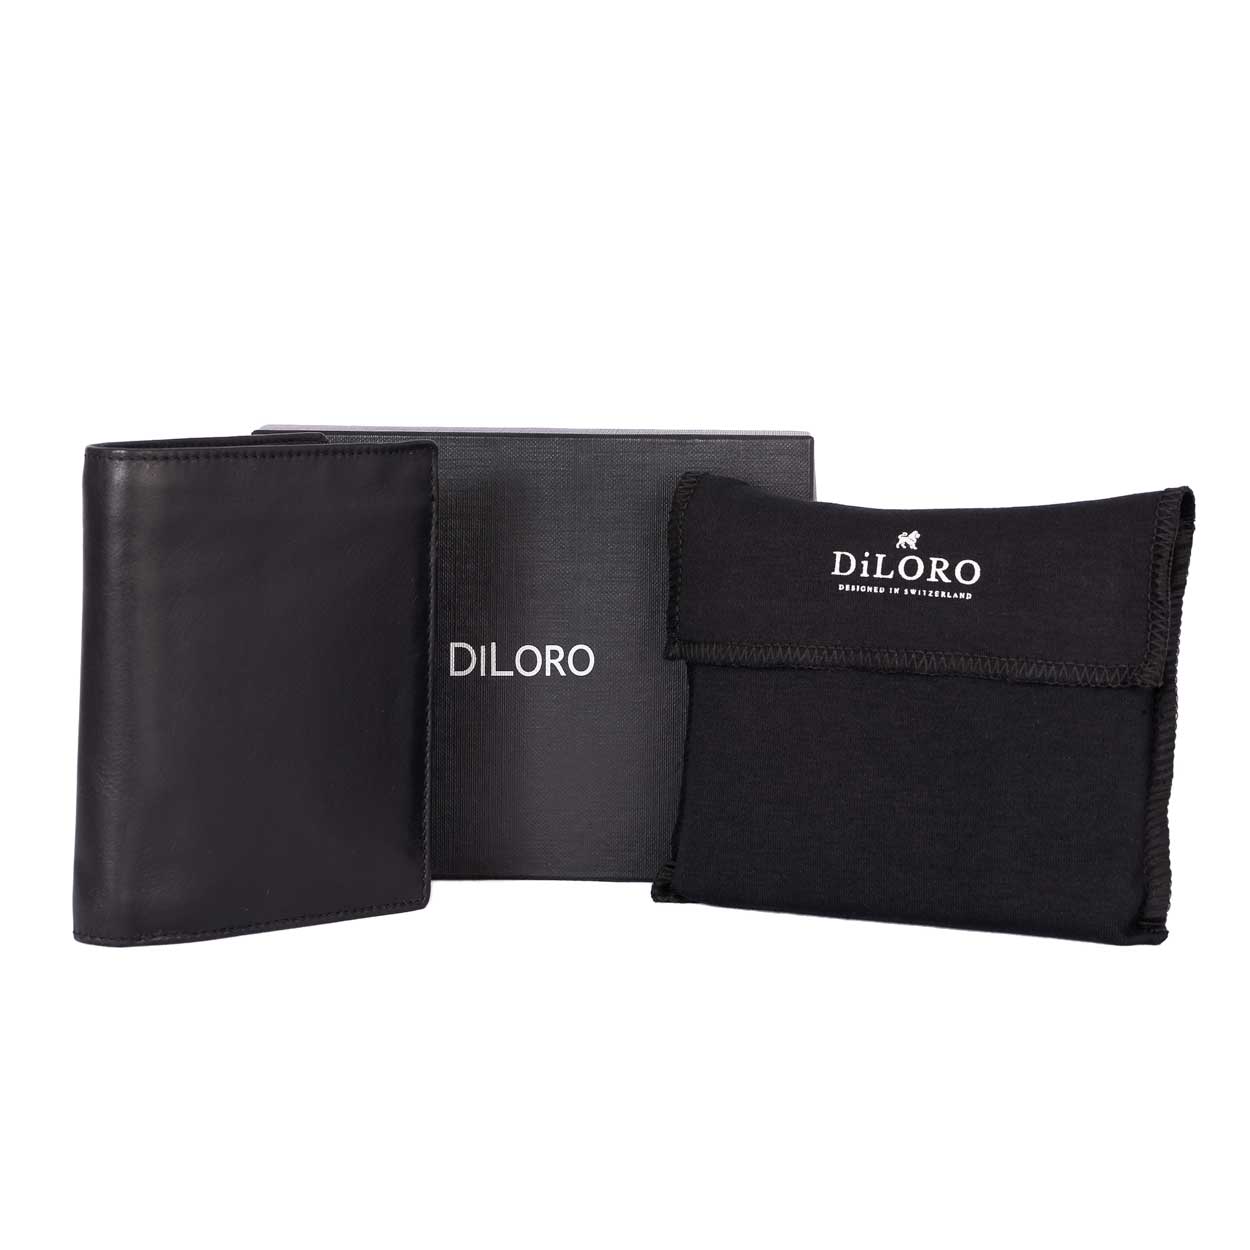 DiLoro Men's Vertical Leather Bifold Flip ID Zip Coin Wallet Black with RFID Protection - With DiLoro Dust Bag and Gift Box